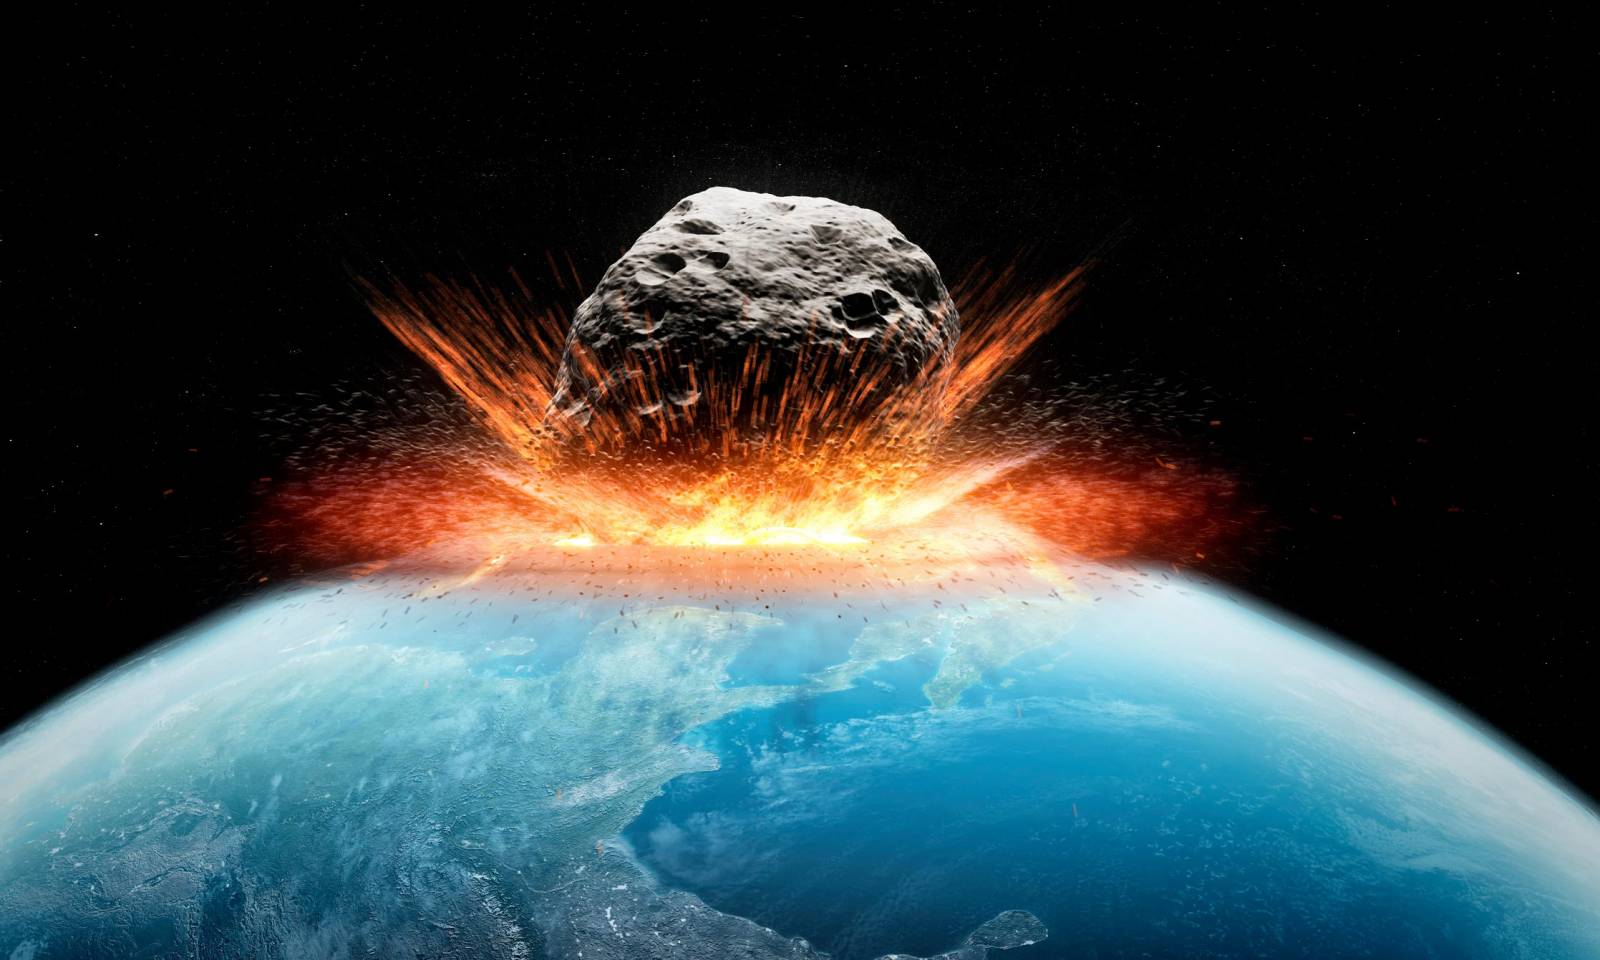 GODMOTHER. GIANT ASTEROID SPEEDS past Earth WITHOUT BEING DETECTED